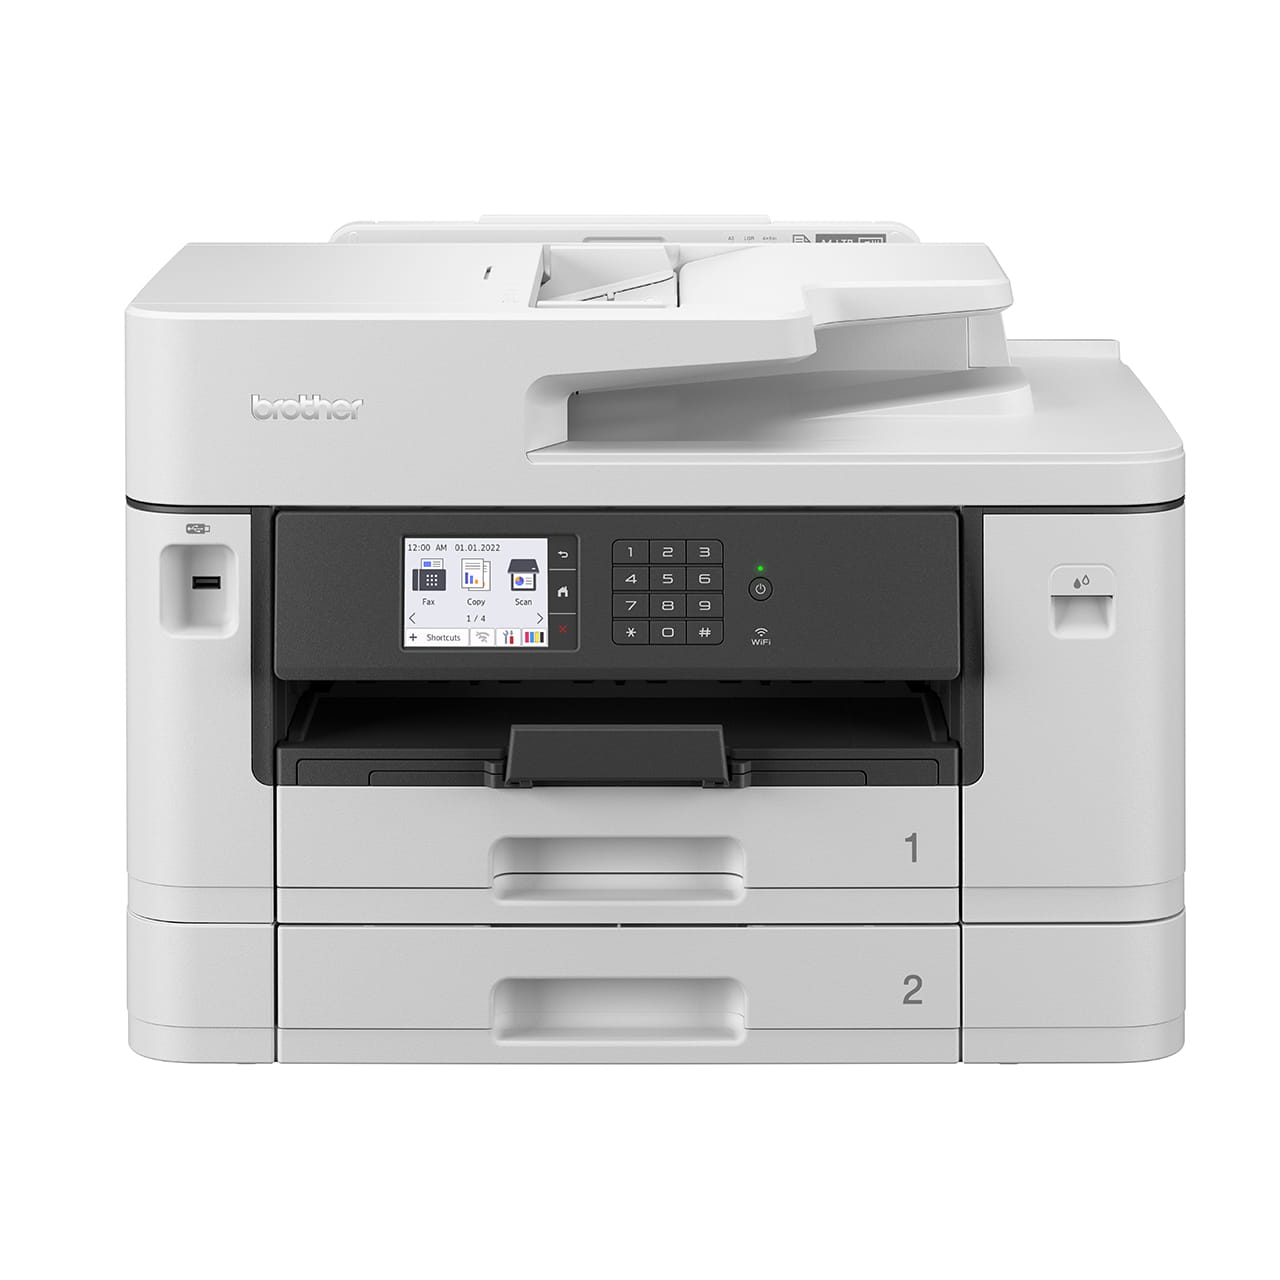 Brother MFC-J2740DW Inkjet Printer Front View